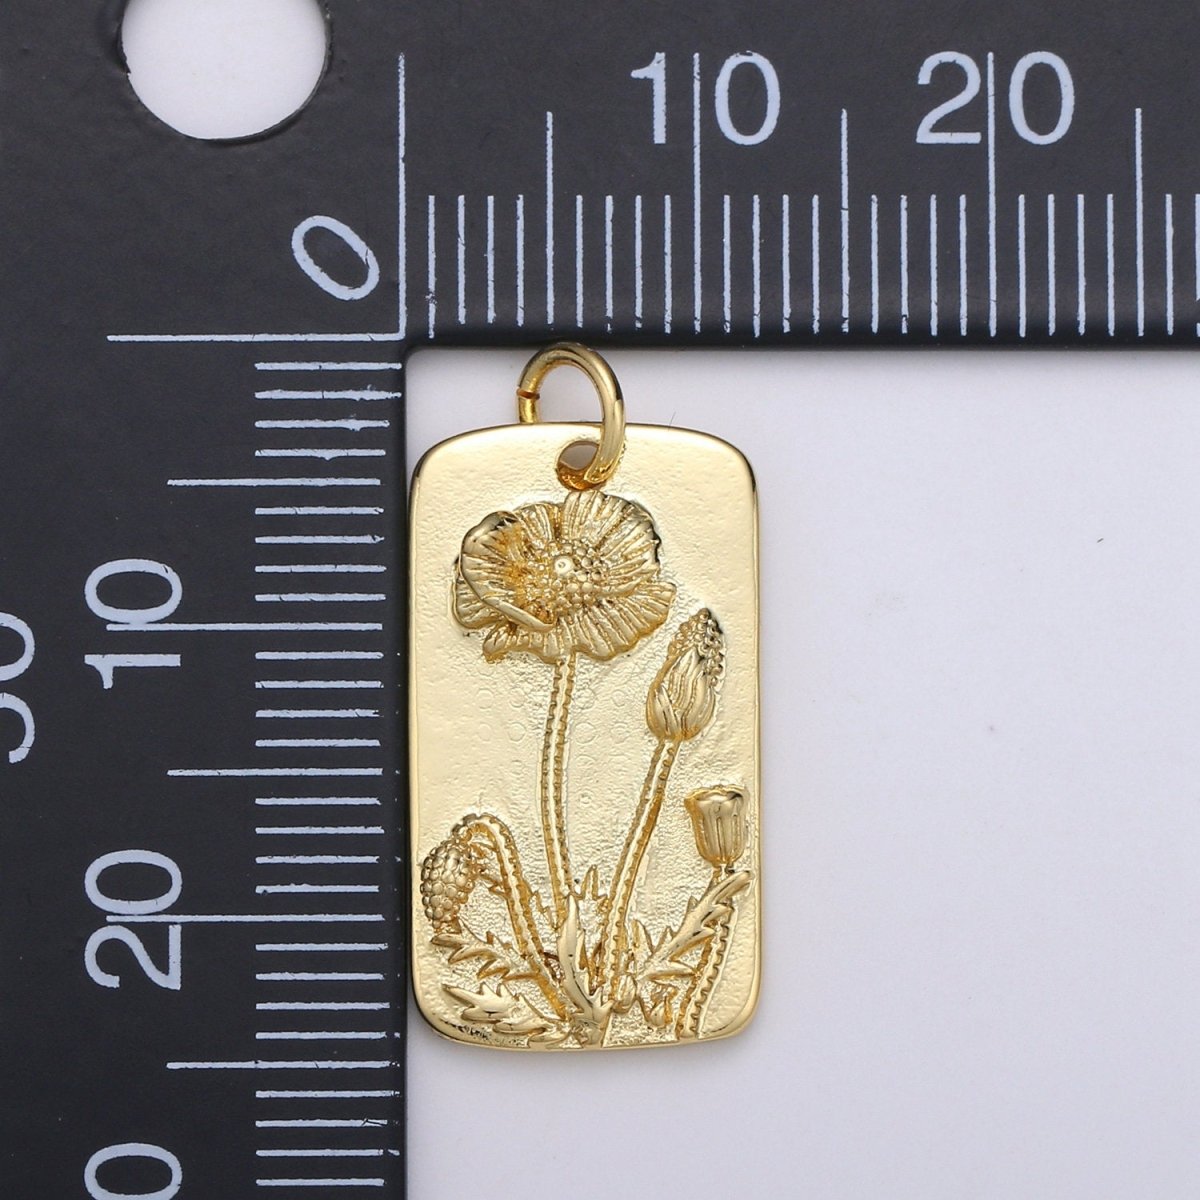 Poppy Flower Charms, Gold Tag Pendant, Dainty Poppy Charm, Small Wild Flower Charm for Necklace Floral Flower Tag Jewelry D-768 - DLUXCA